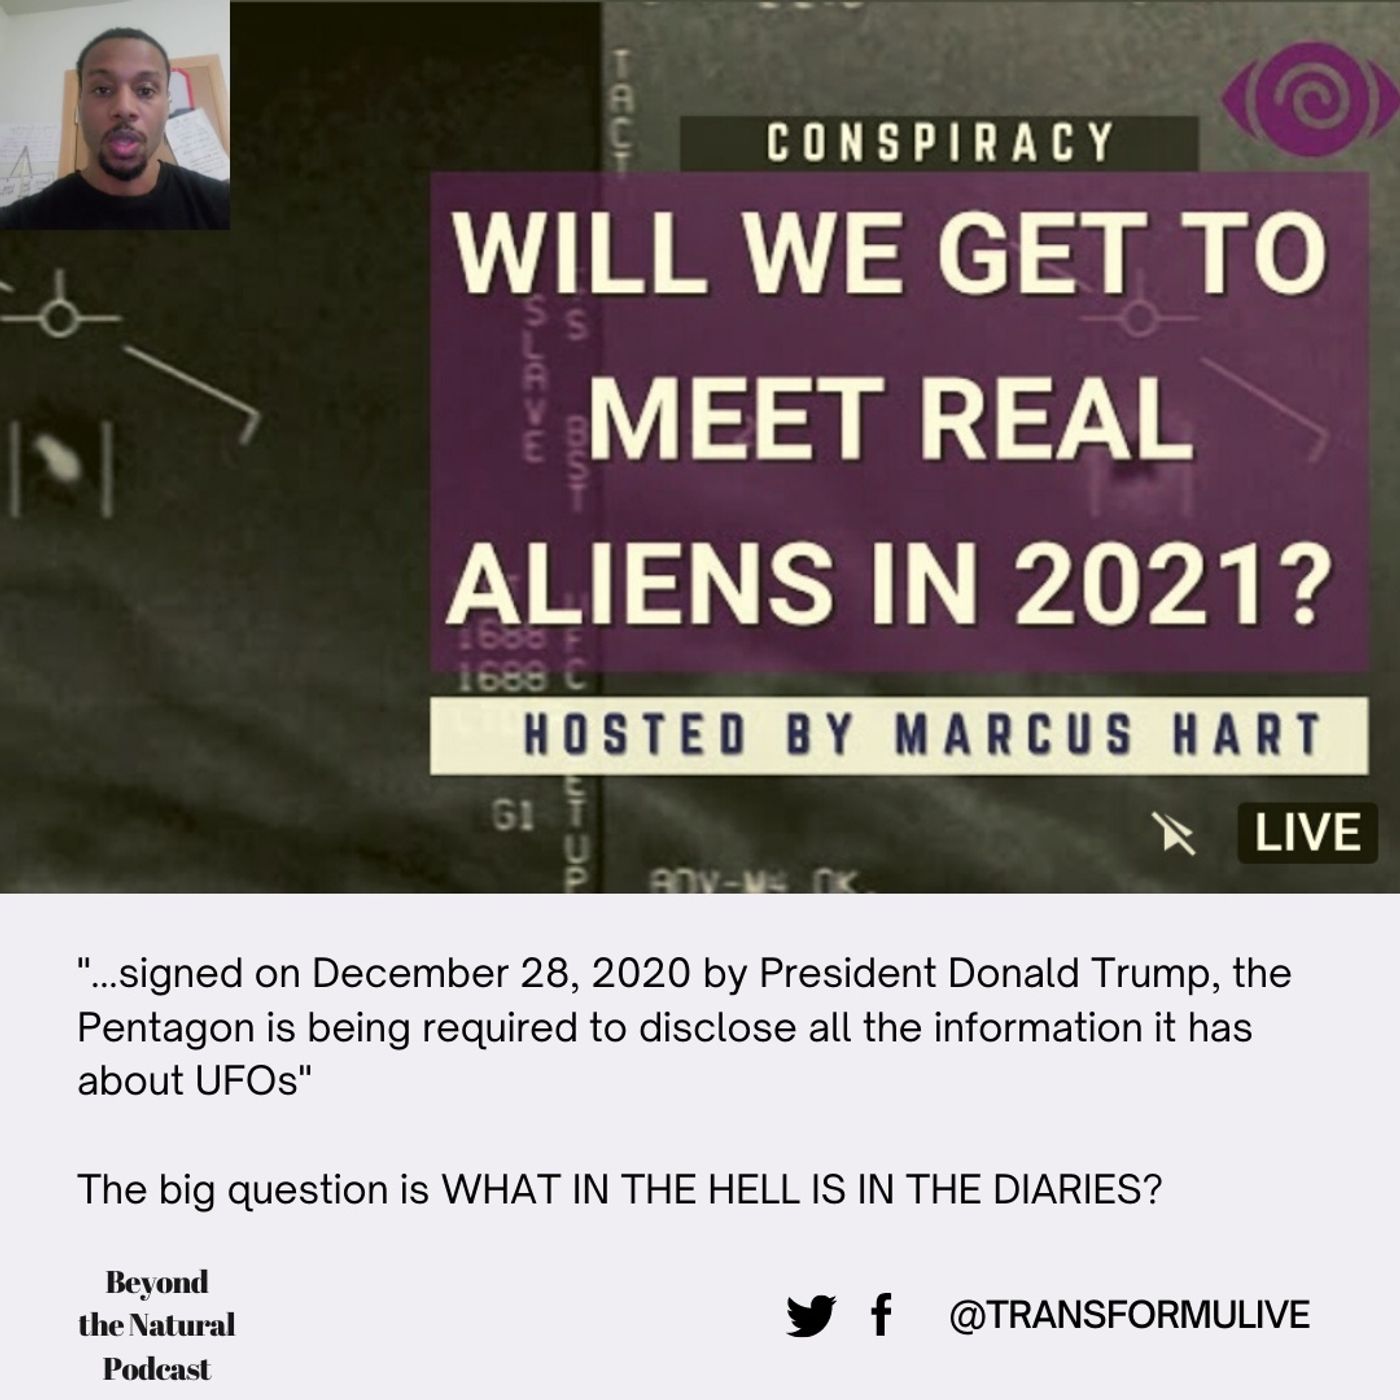 Will We Get to Meet Real Aliens In 2021?